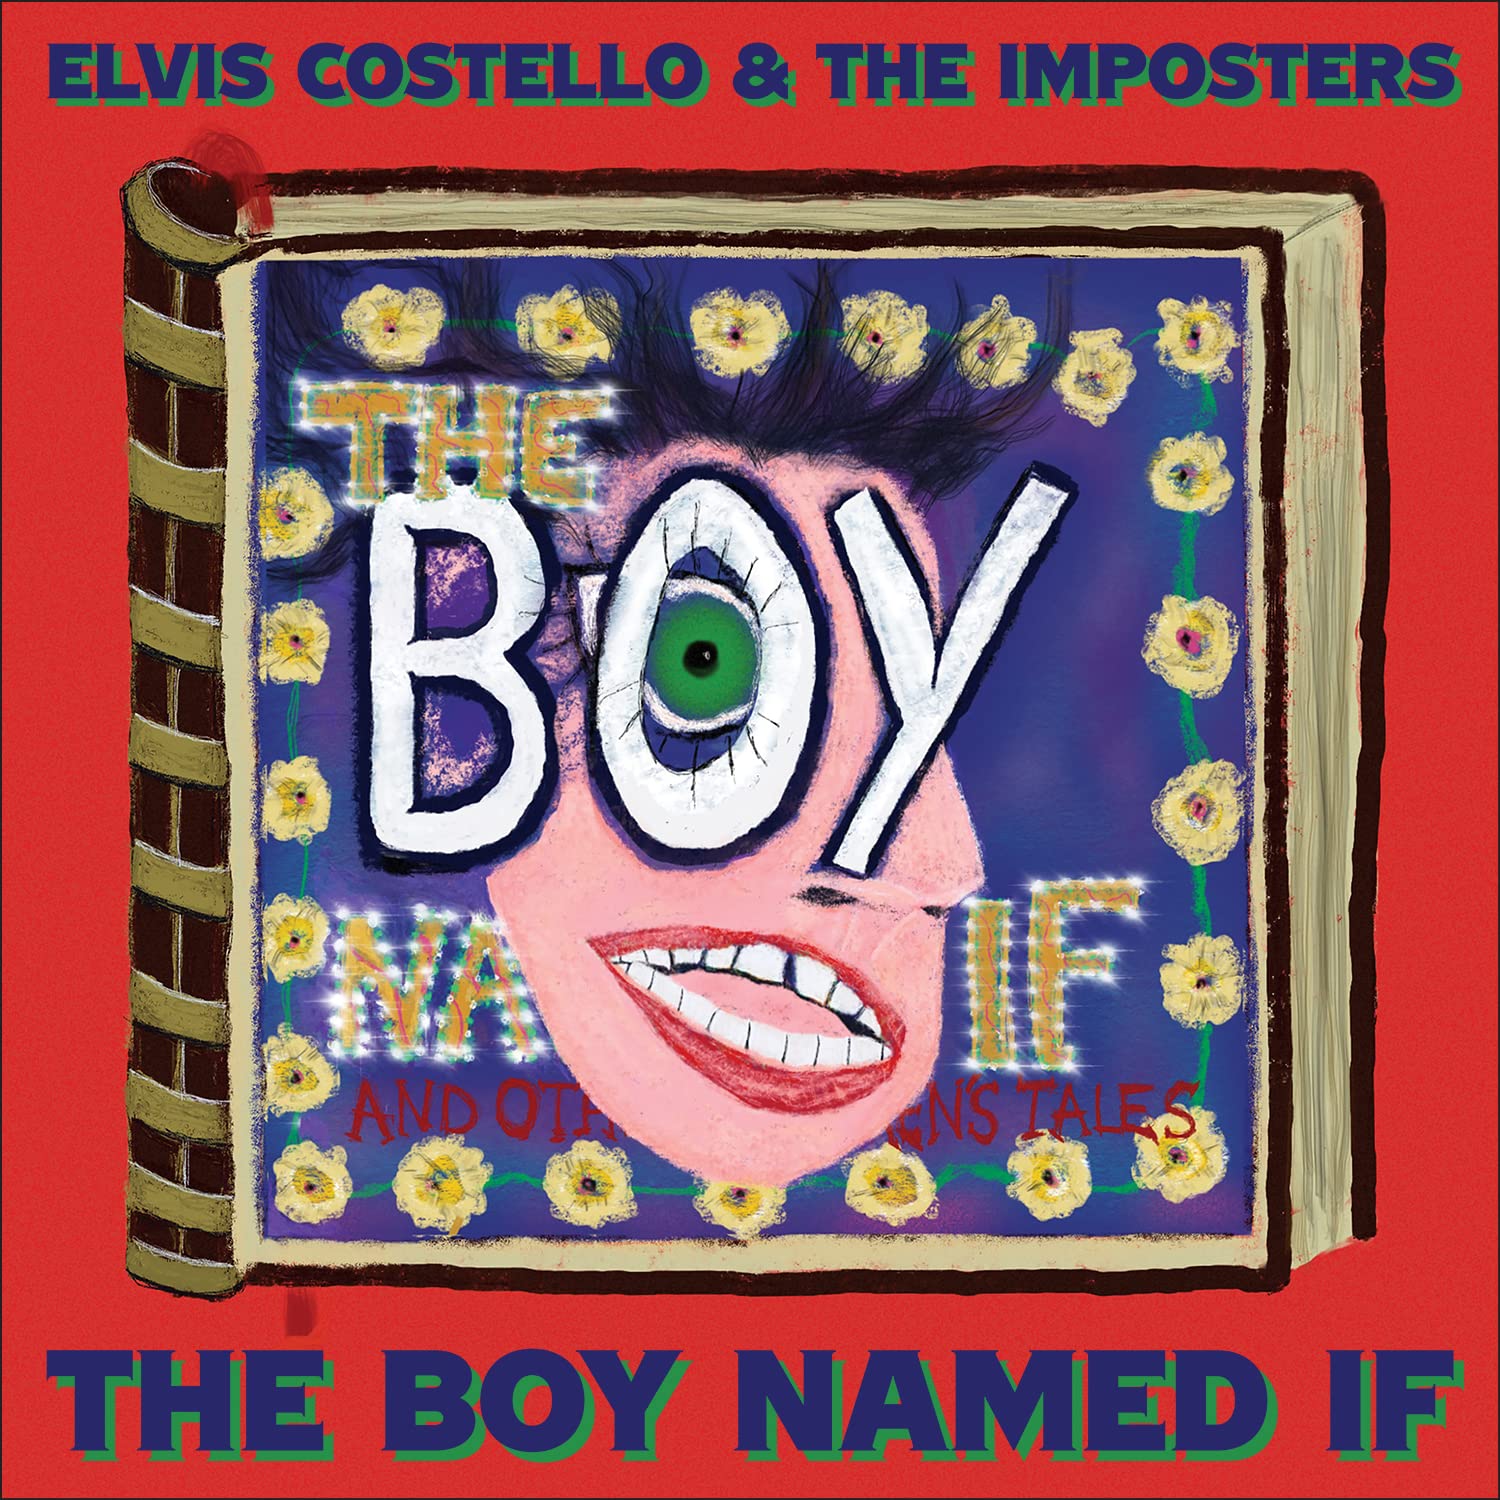 Elvis Costello & The Imposters: The Boy Named If [Album Review]